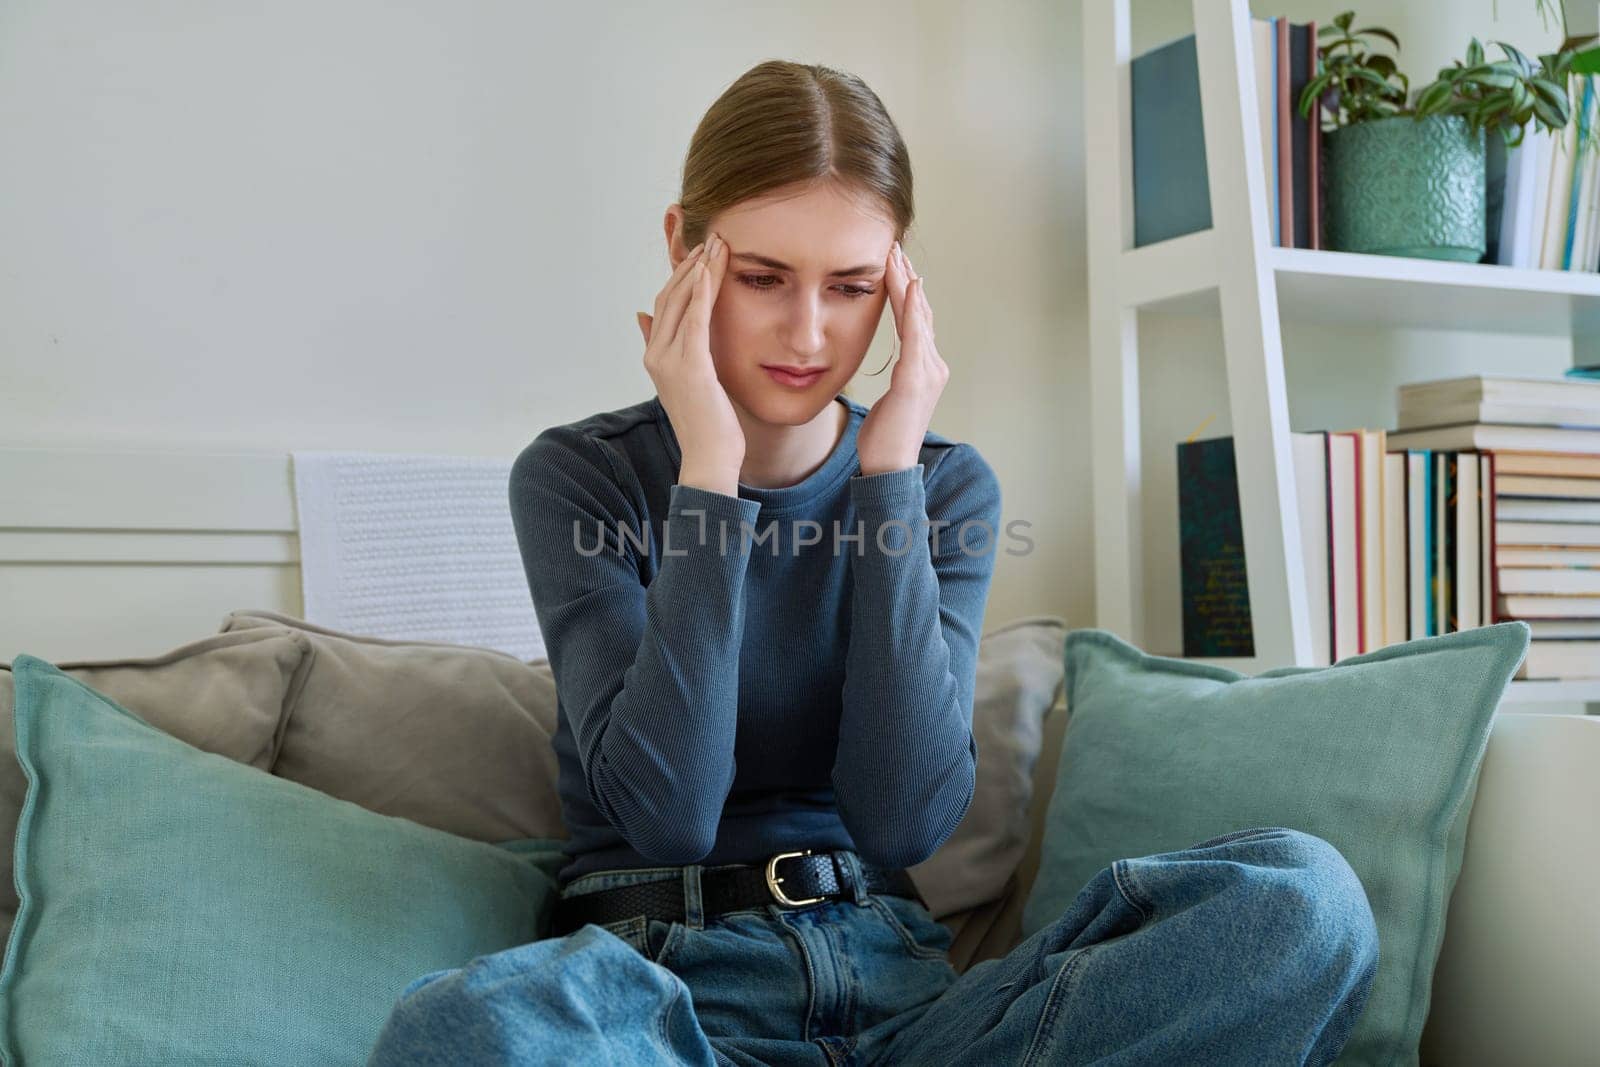 Young suffering teenage female having headache, holding head with hands, sitting on couch at home. Health, problems, mental difficulties, depression, youth concept